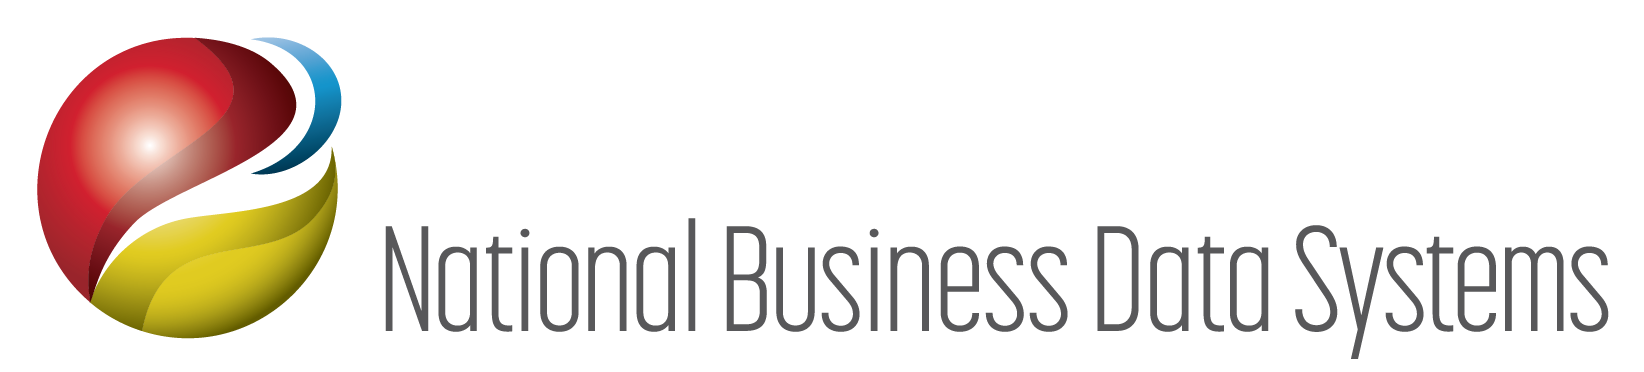 National Business Data Systems